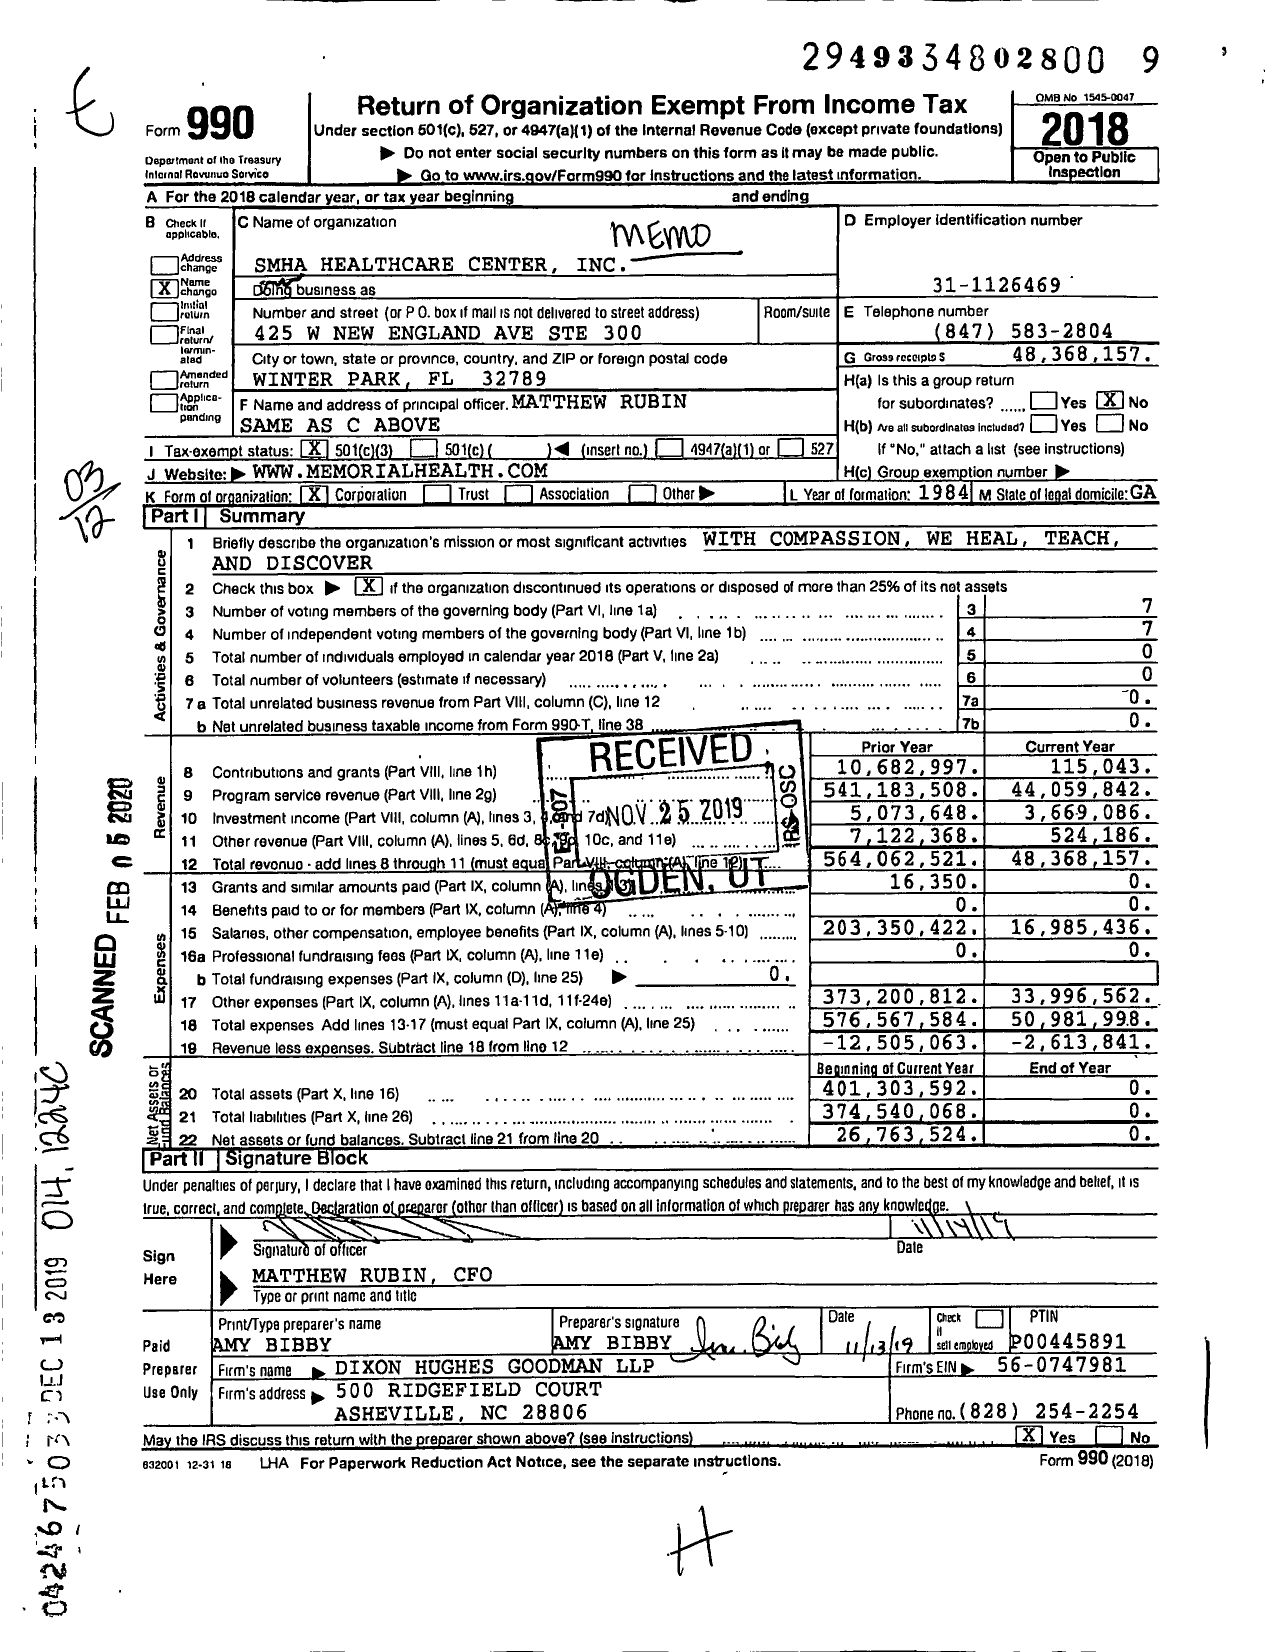 Image of first page of 2018 Form 990 for Smha Healthcare Center (MUMC)